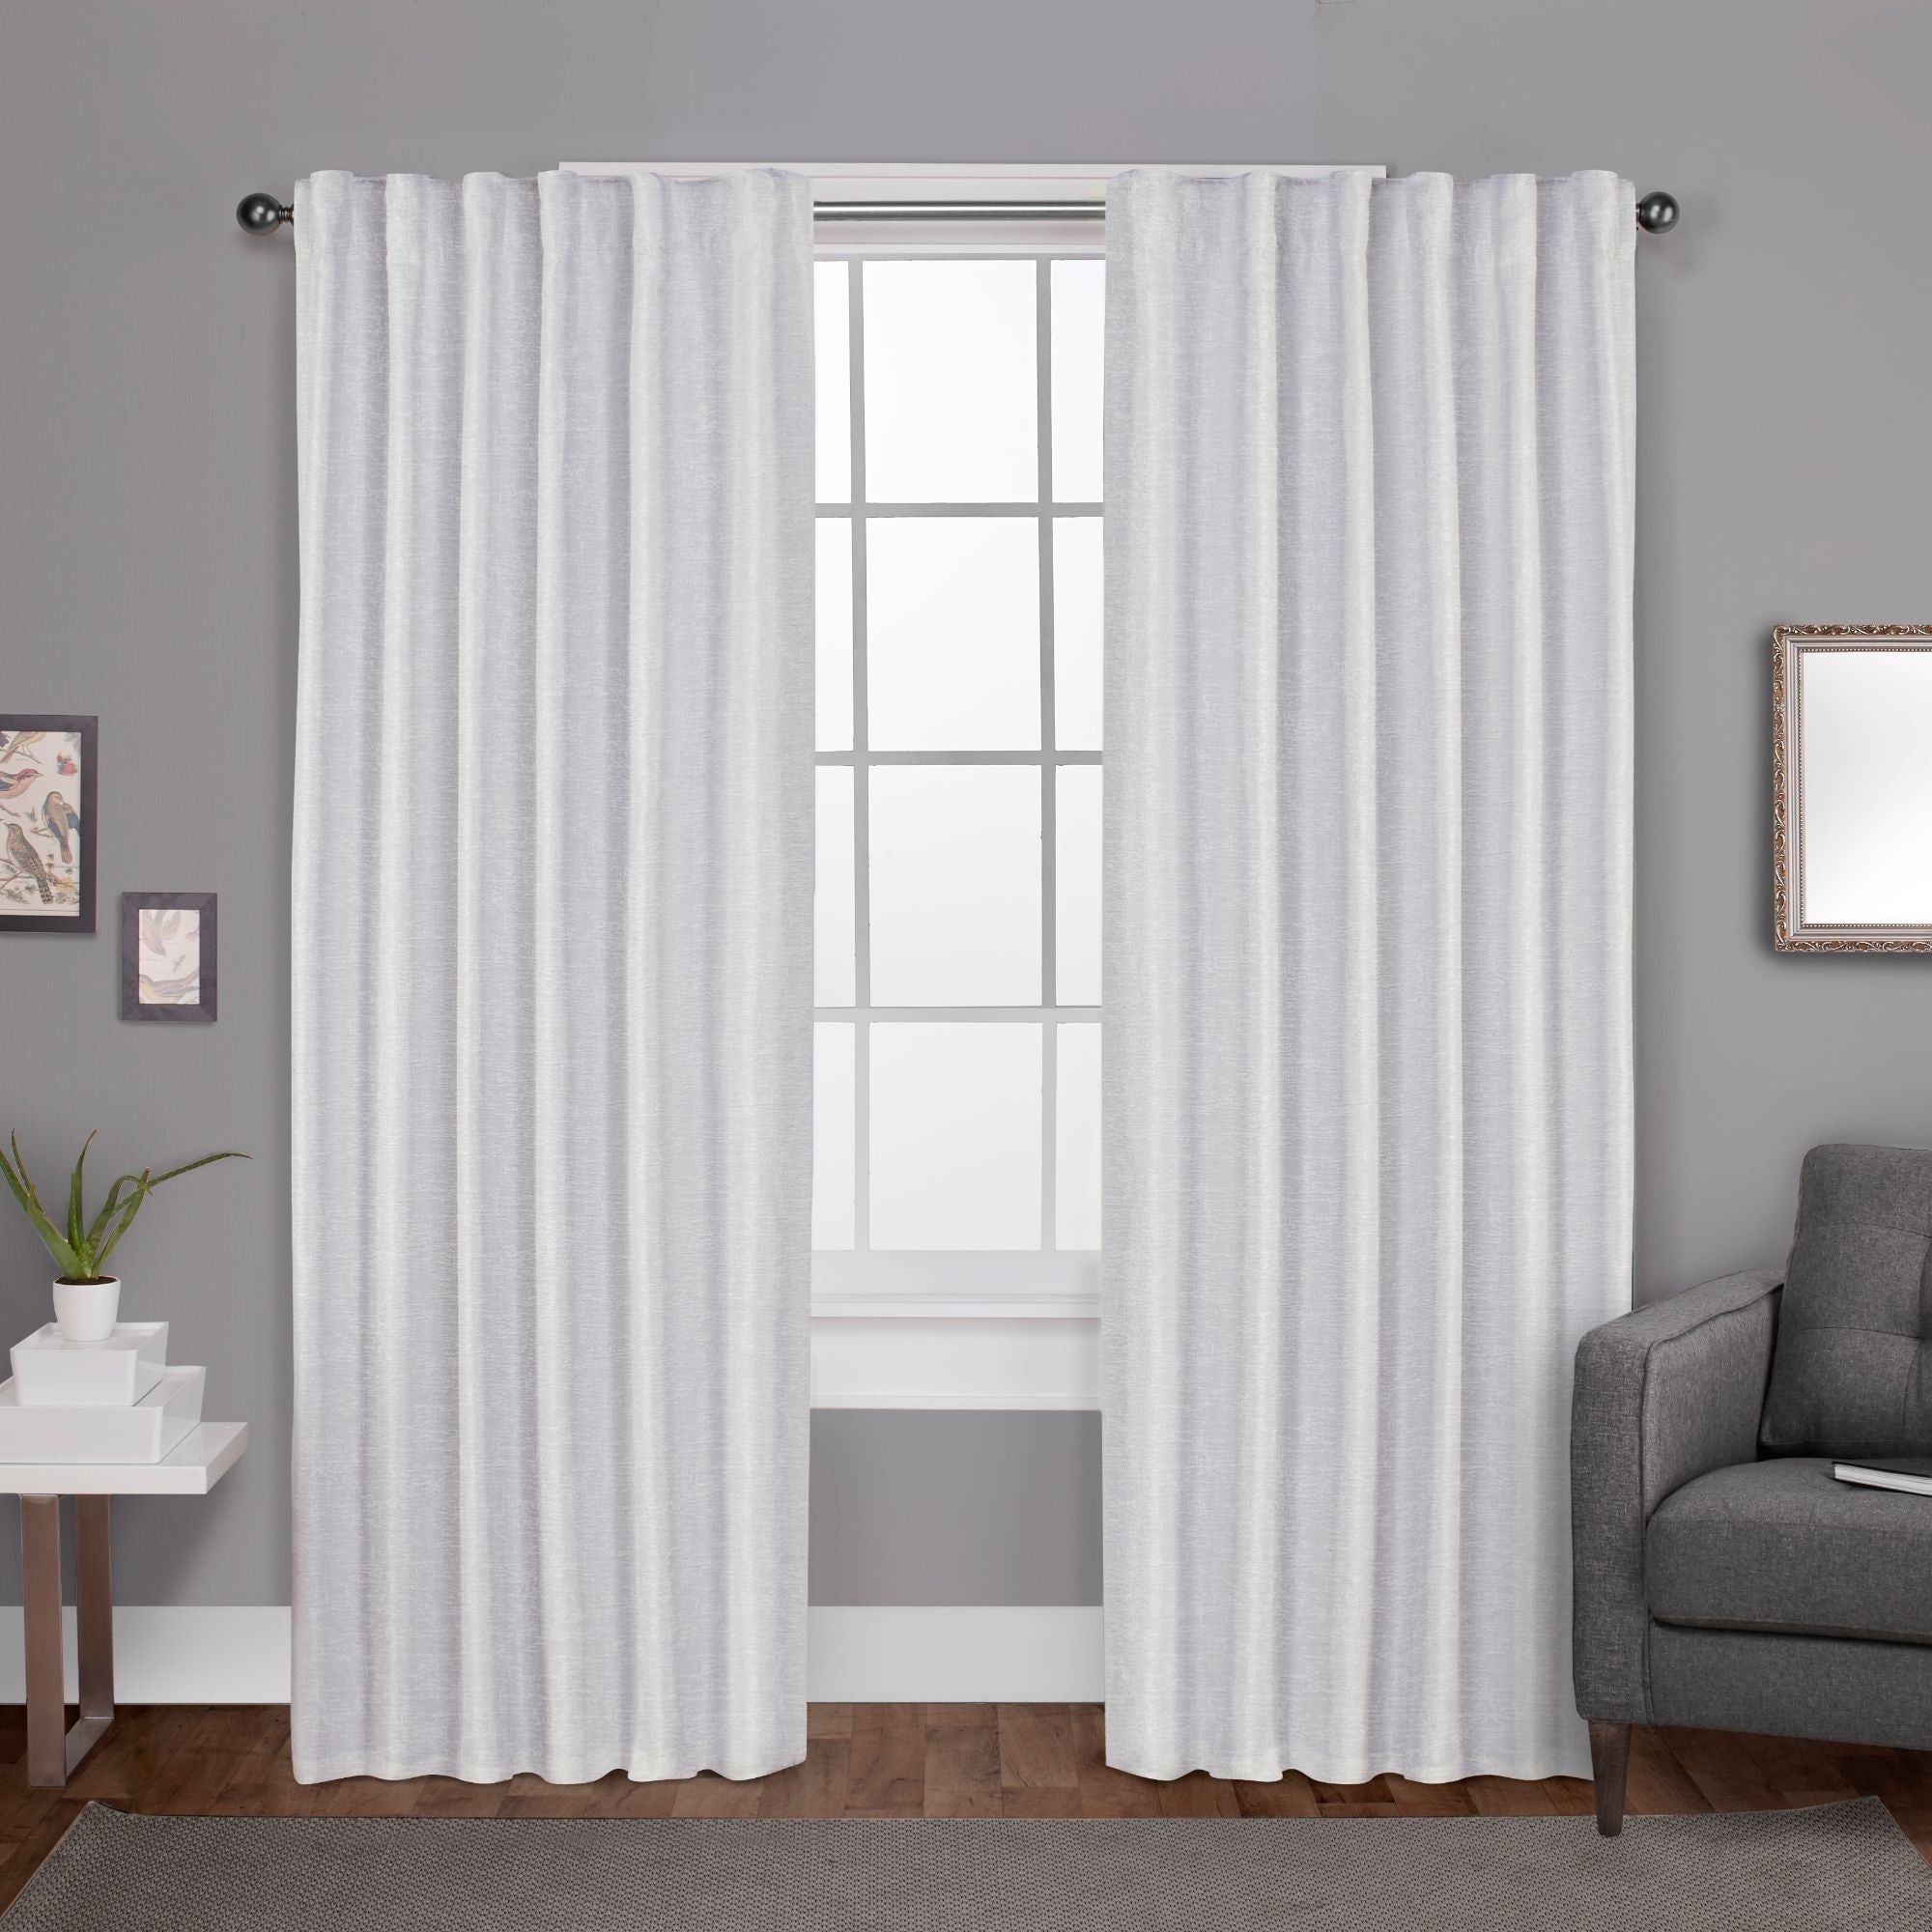 Ati Home Zeus Thermal Woven Blackout Back Tab Top Curtain Panel Pair Pertaining To Most Current Cyrus Thermal Blackout Back Tab Curtain Panels (View 2 of 20)